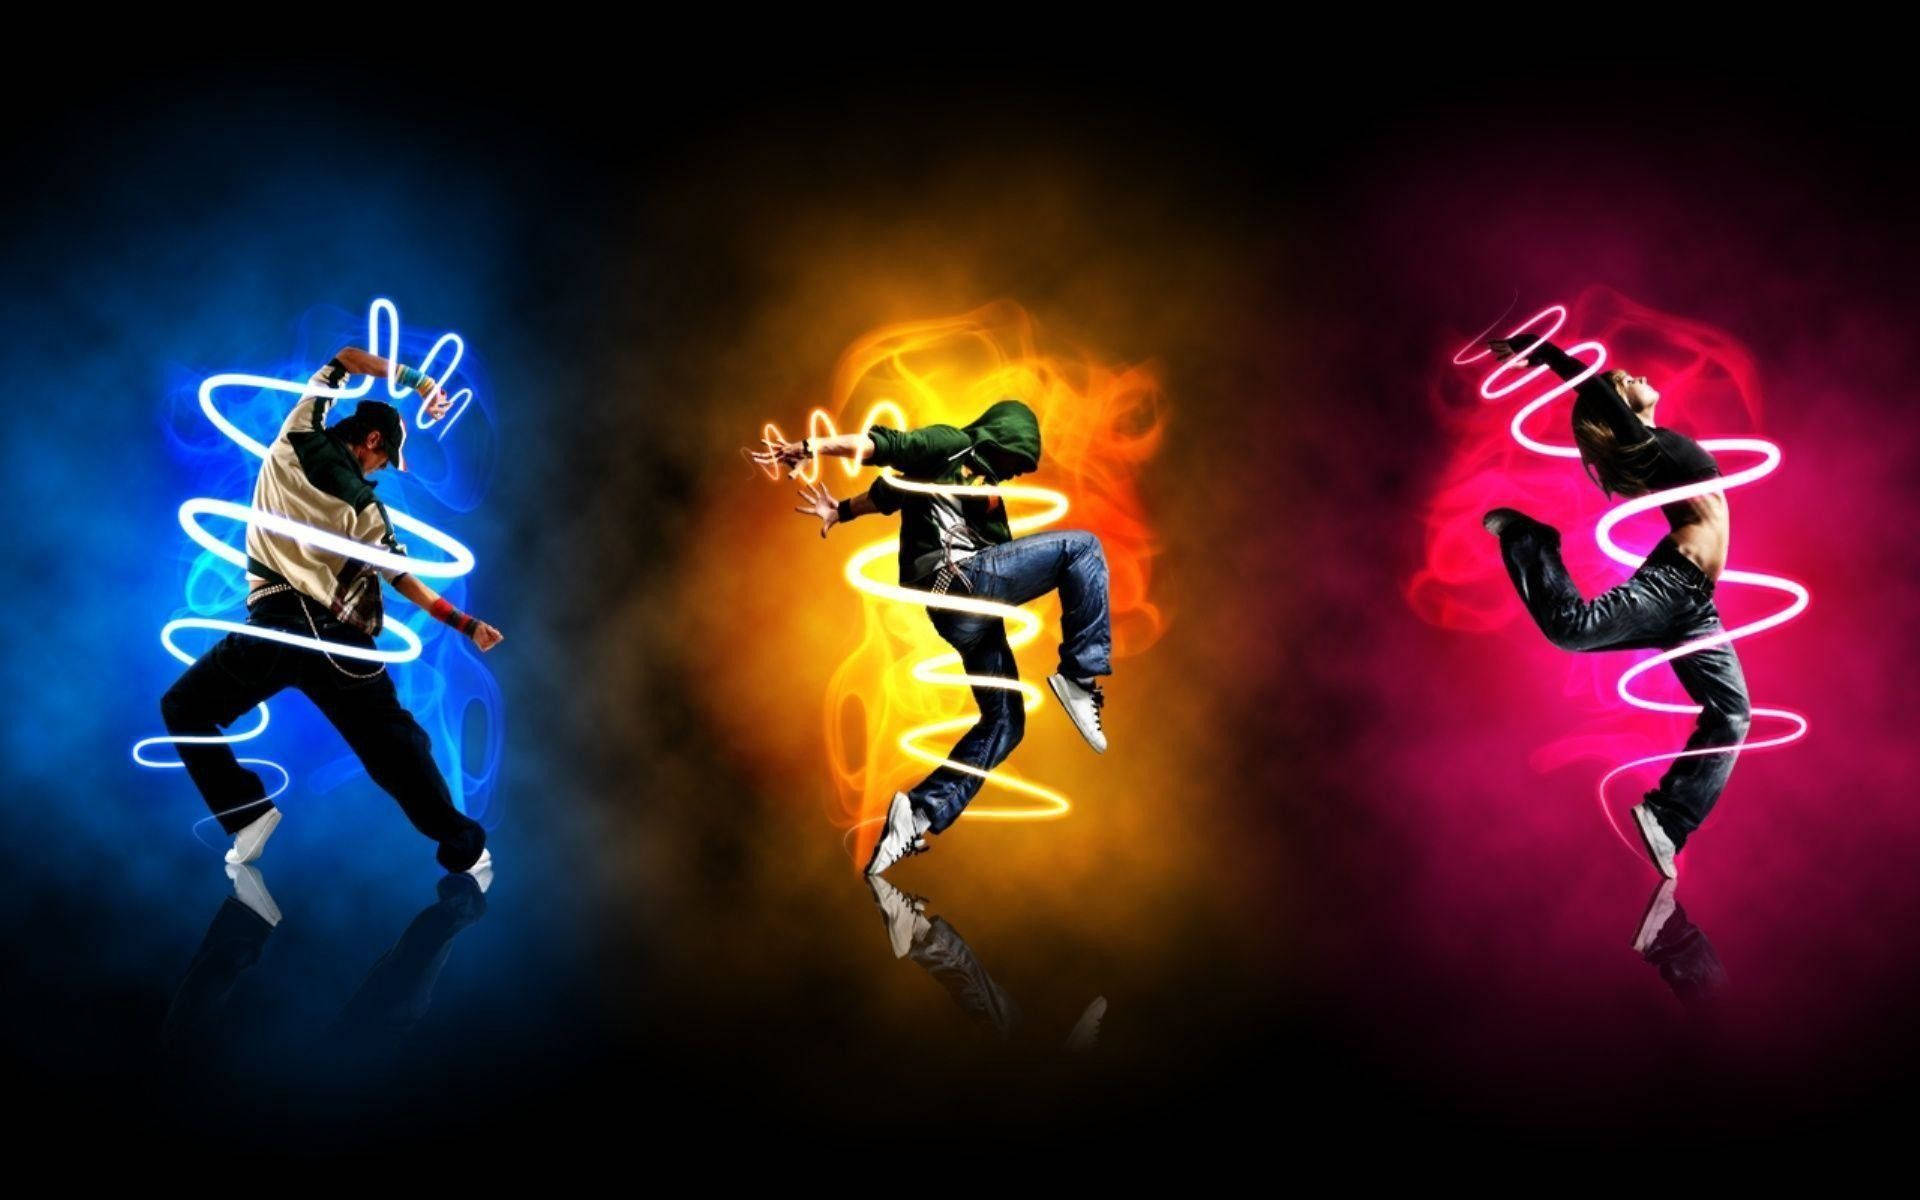 Awesome Neon Dance Pose Wallpaper